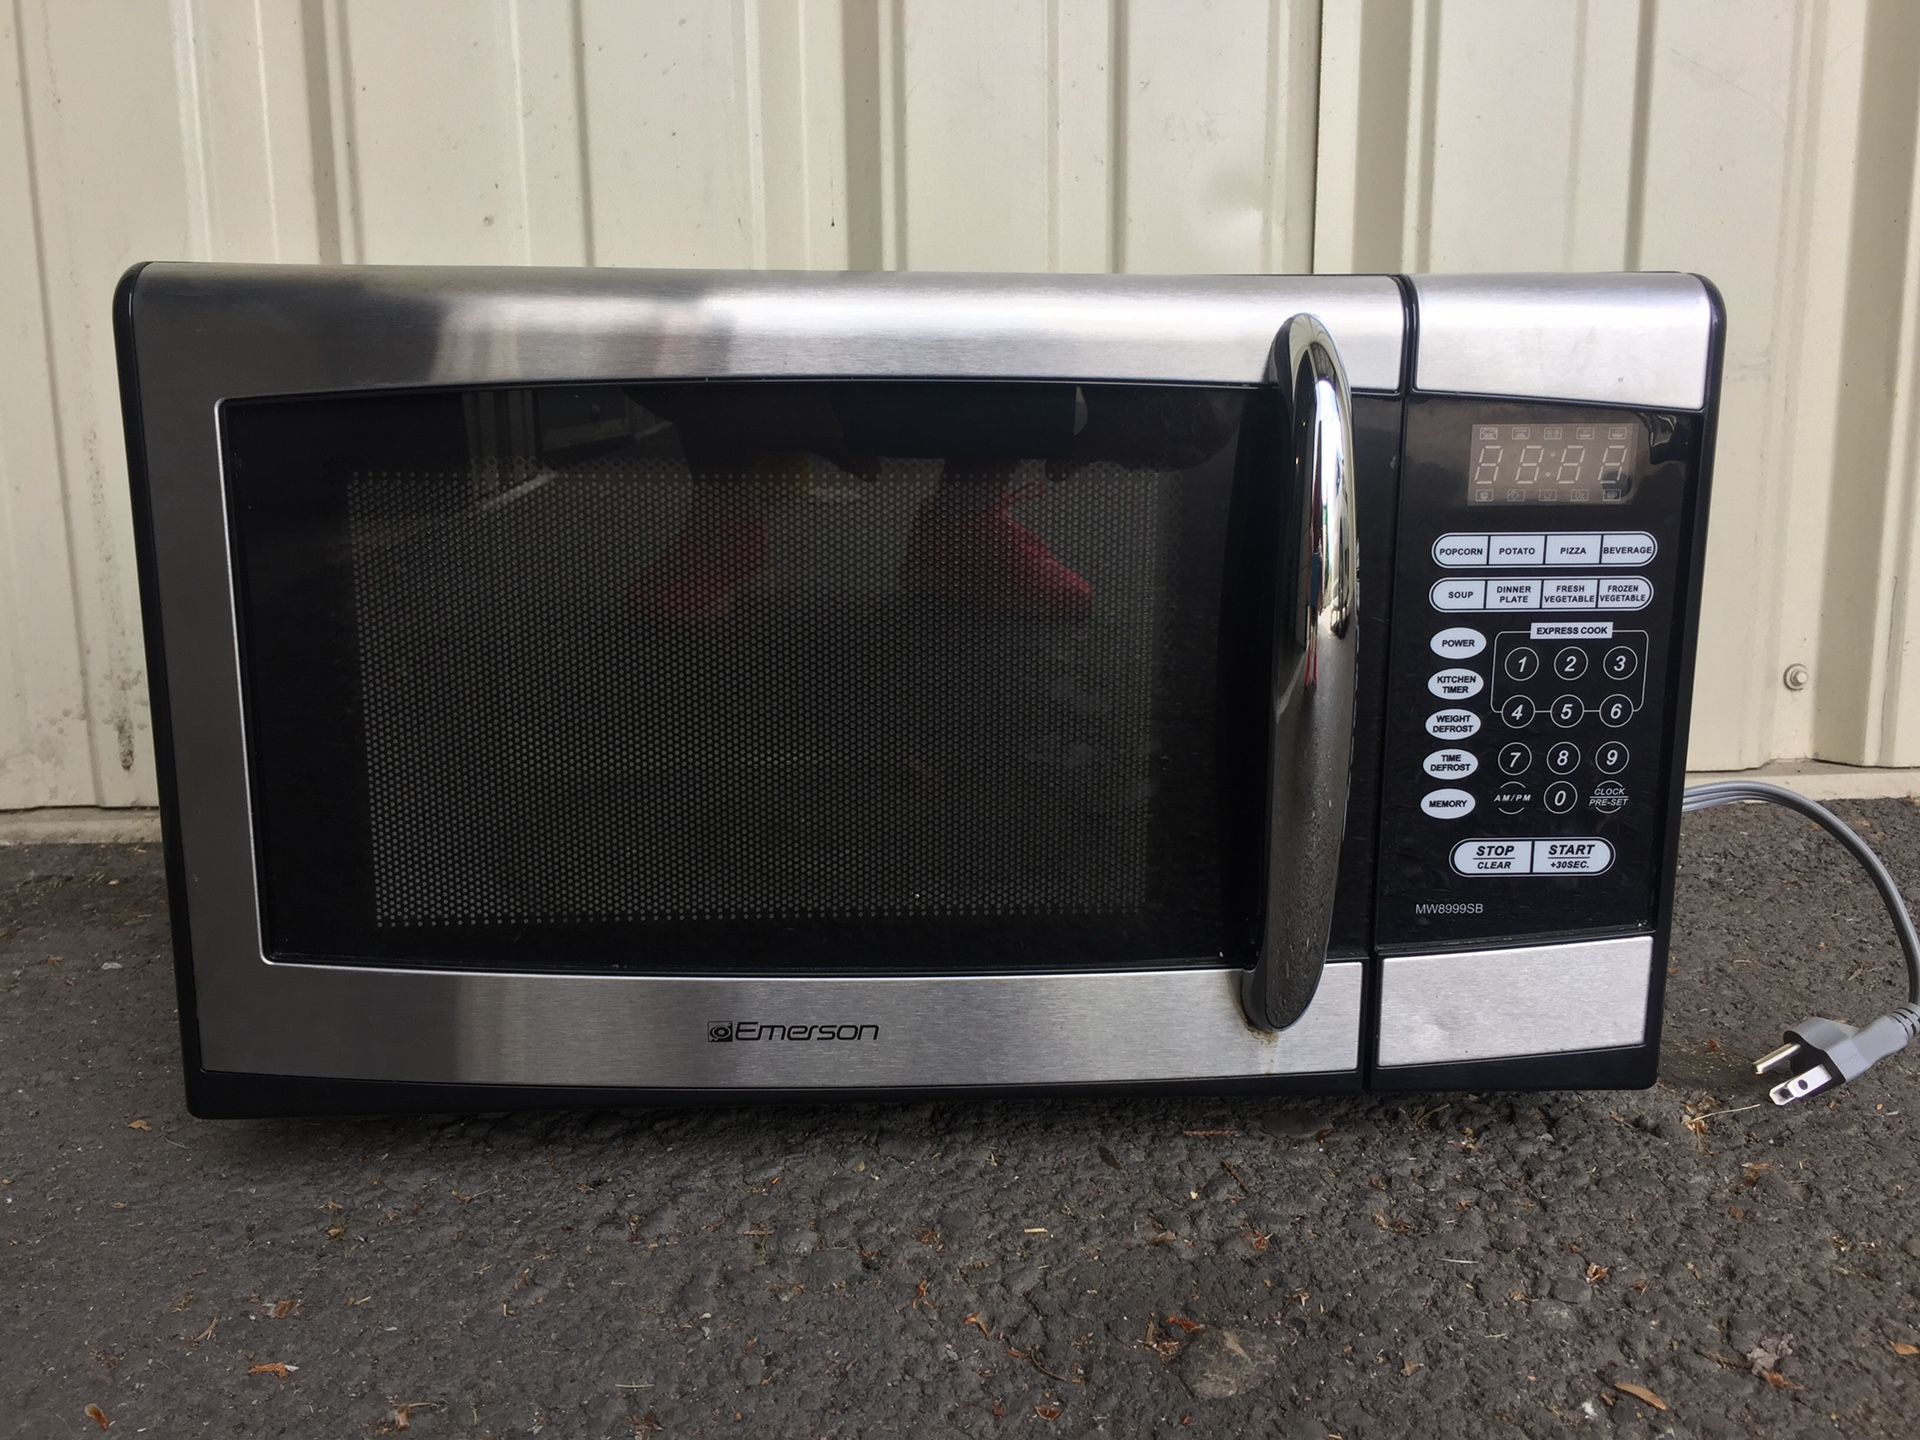 Emerson MW8999SB Stainless Steel 0.9 Cubic Foot 900-watt Microwave Oven